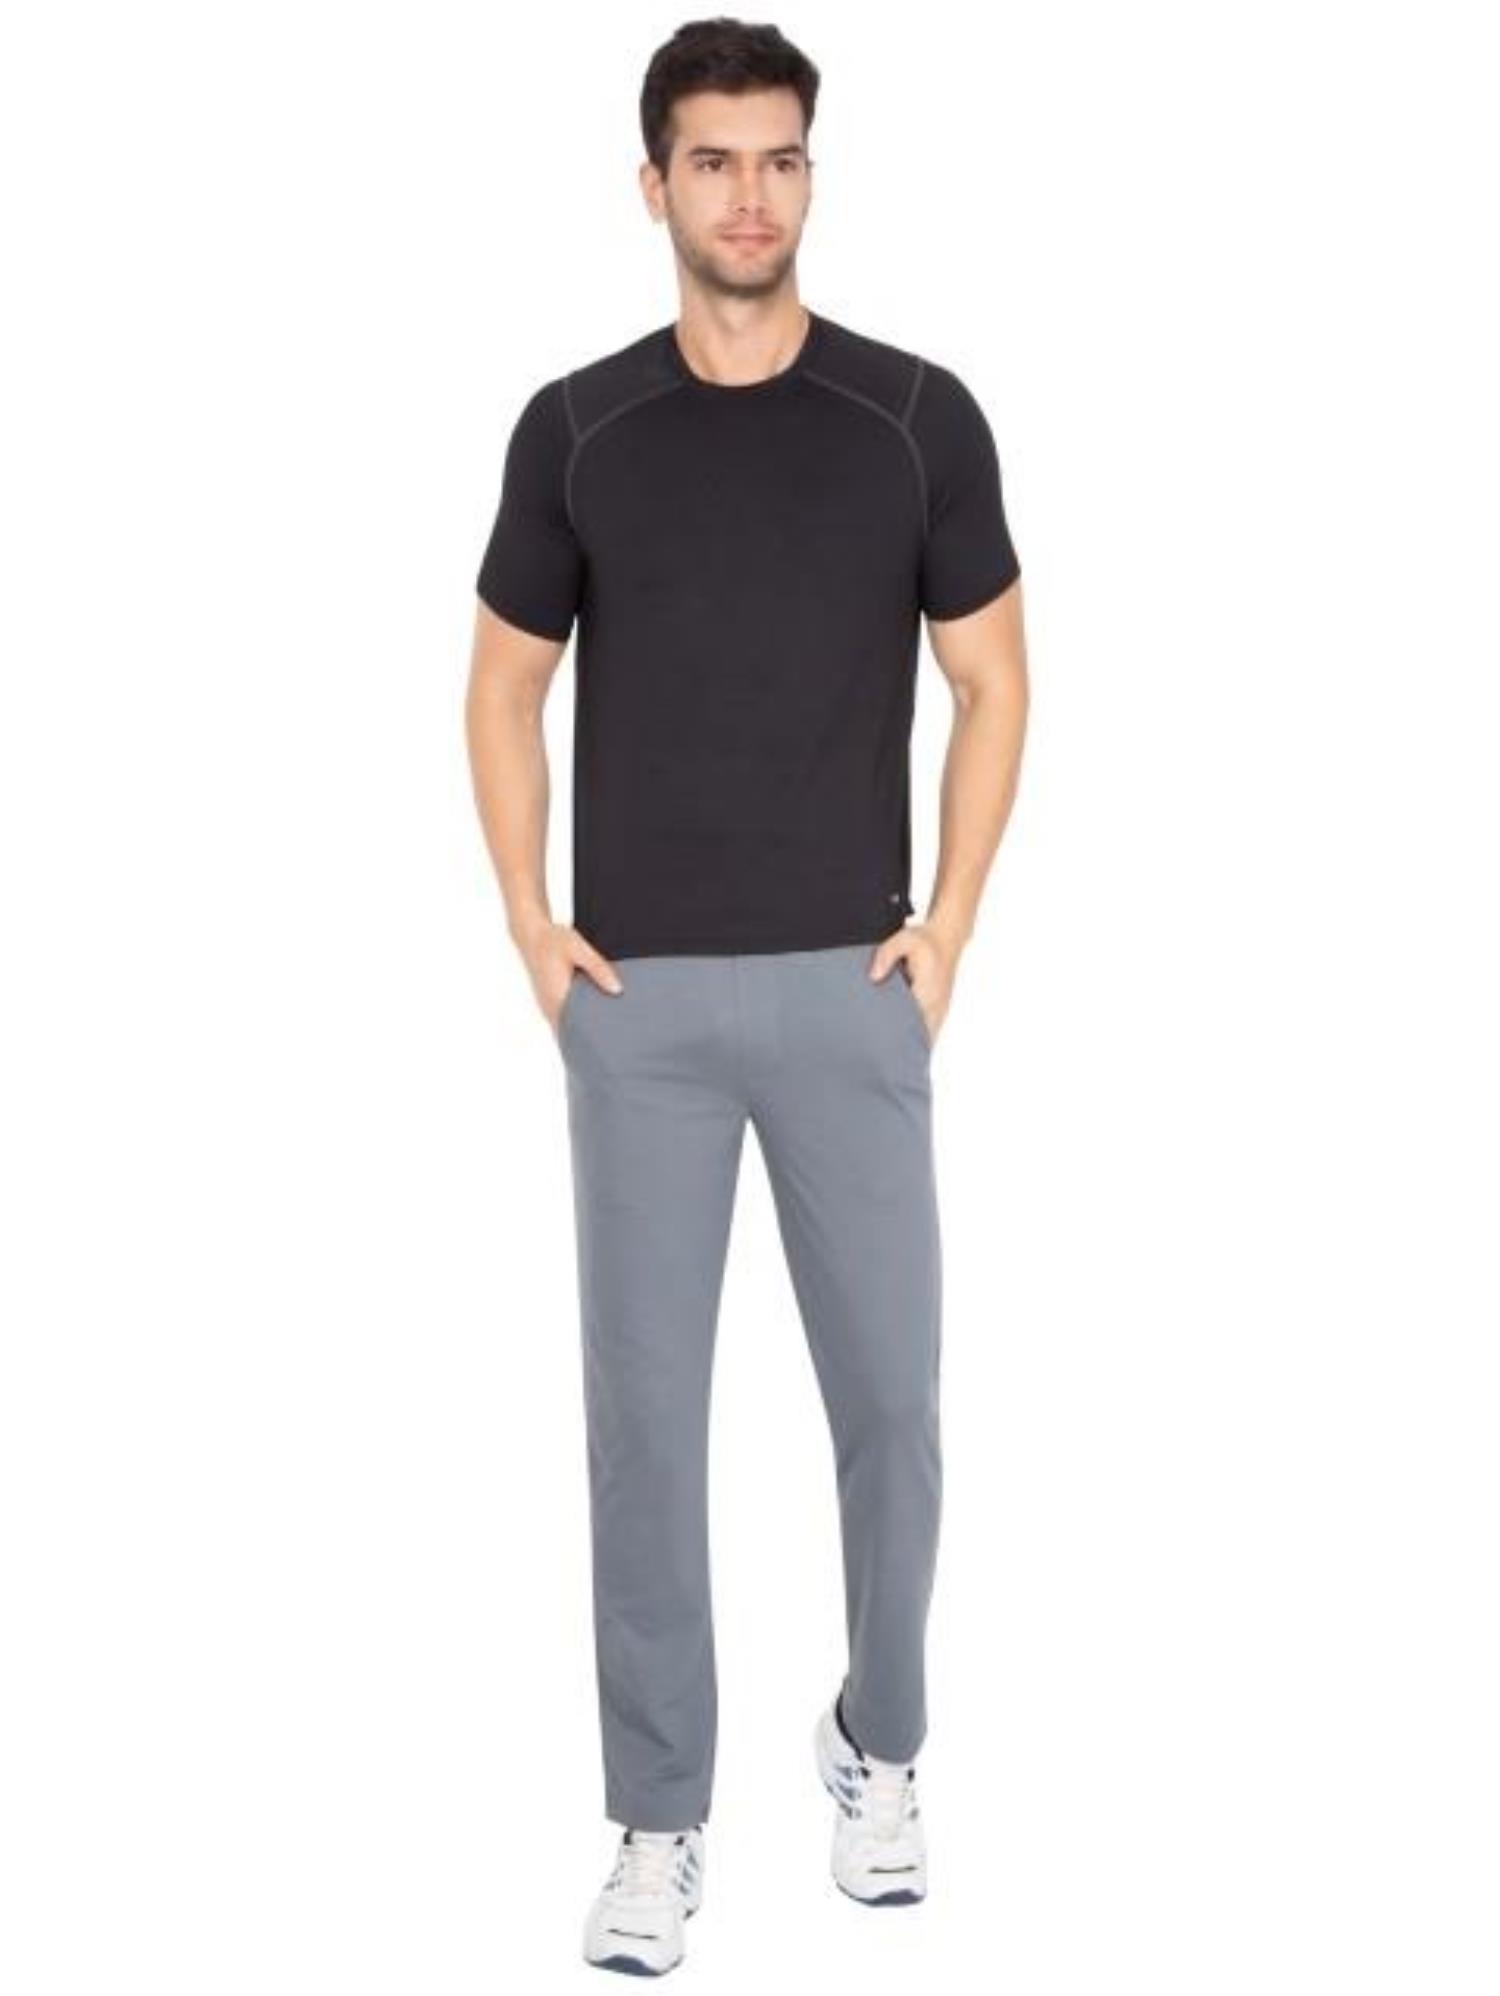 Swadesiblog.com - Best Jockey Track Pants For Men-Reviews & Buyers Guide Jockey  Track Pants are the most comfortable and informal types of bottom wear that  can be worn anywhere and at any